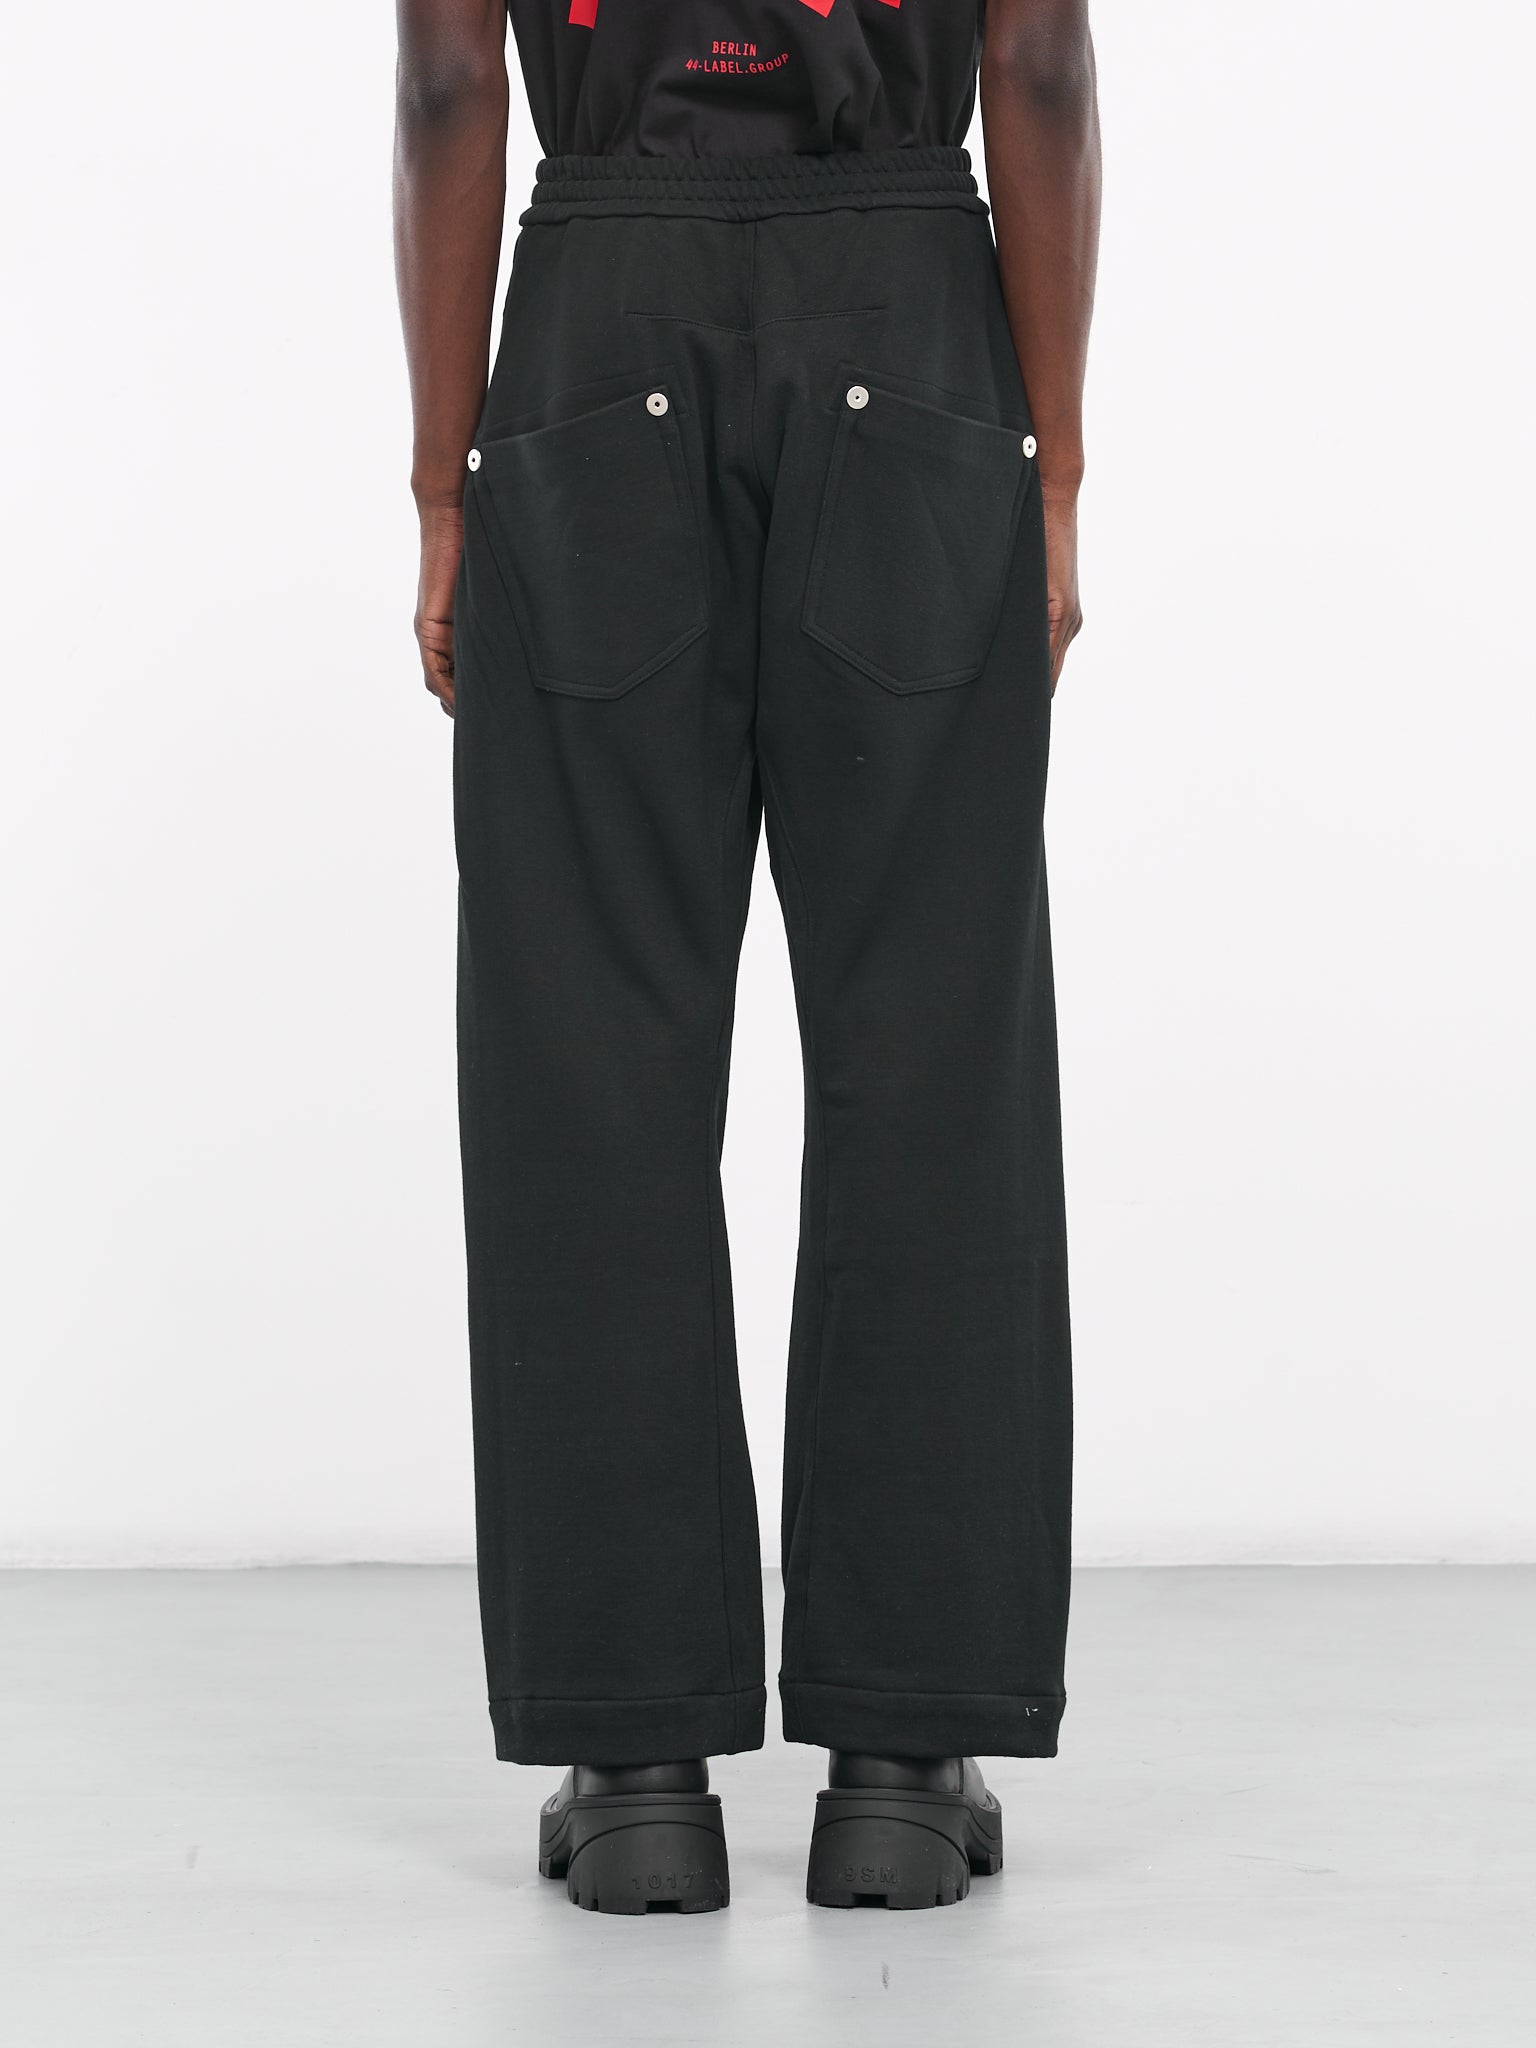 23AW Omar Afridi Twisted Lounge Pants - その他